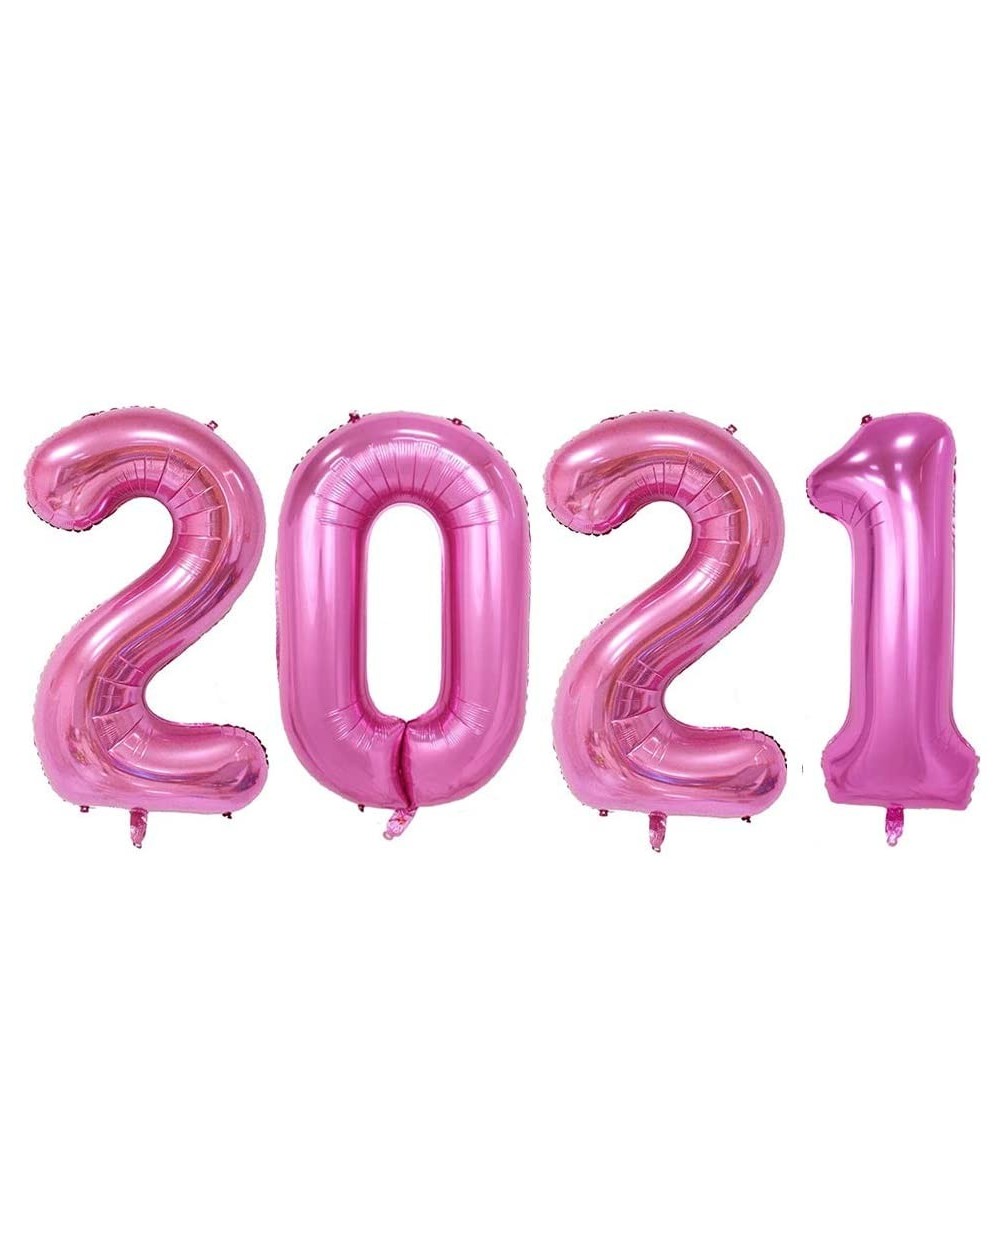 Balloons 40 Inch Pink 2021 Number Foil Balloons for New Year Graduation Party Decorations Balloons (Pink) - Pink - CG19D0K7DU...